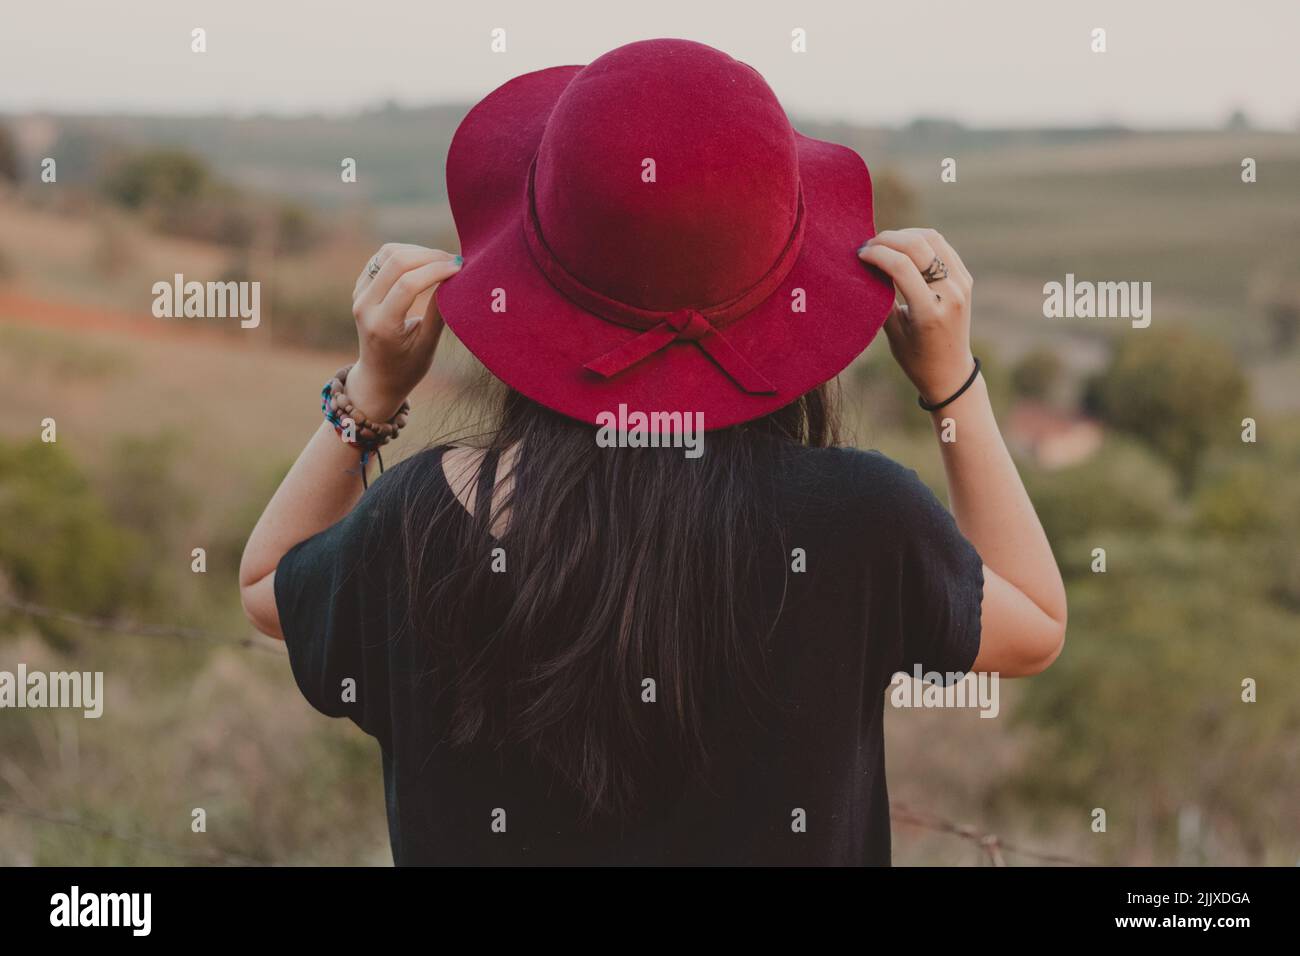 woman from the back wearing a hat Stock Photo